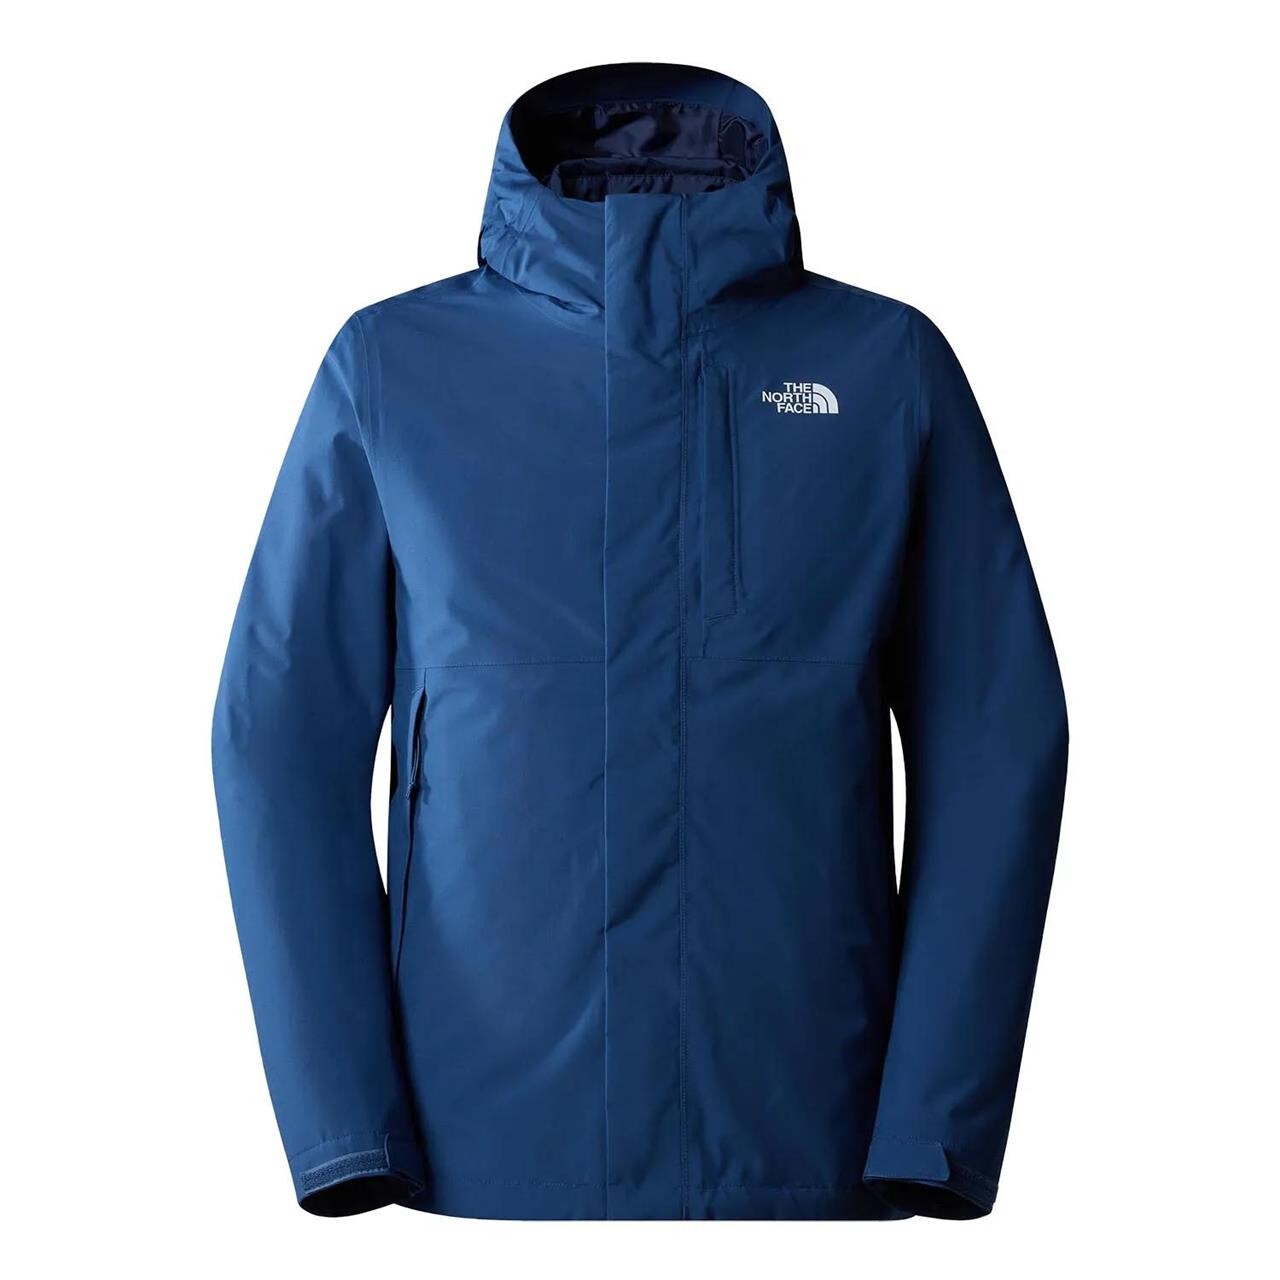 Se The North Face Mens Carto Triclimate Jacket (Blå (SHADY BLUE/SUMMIT NAVY) Small) hos Friluftsland.dk